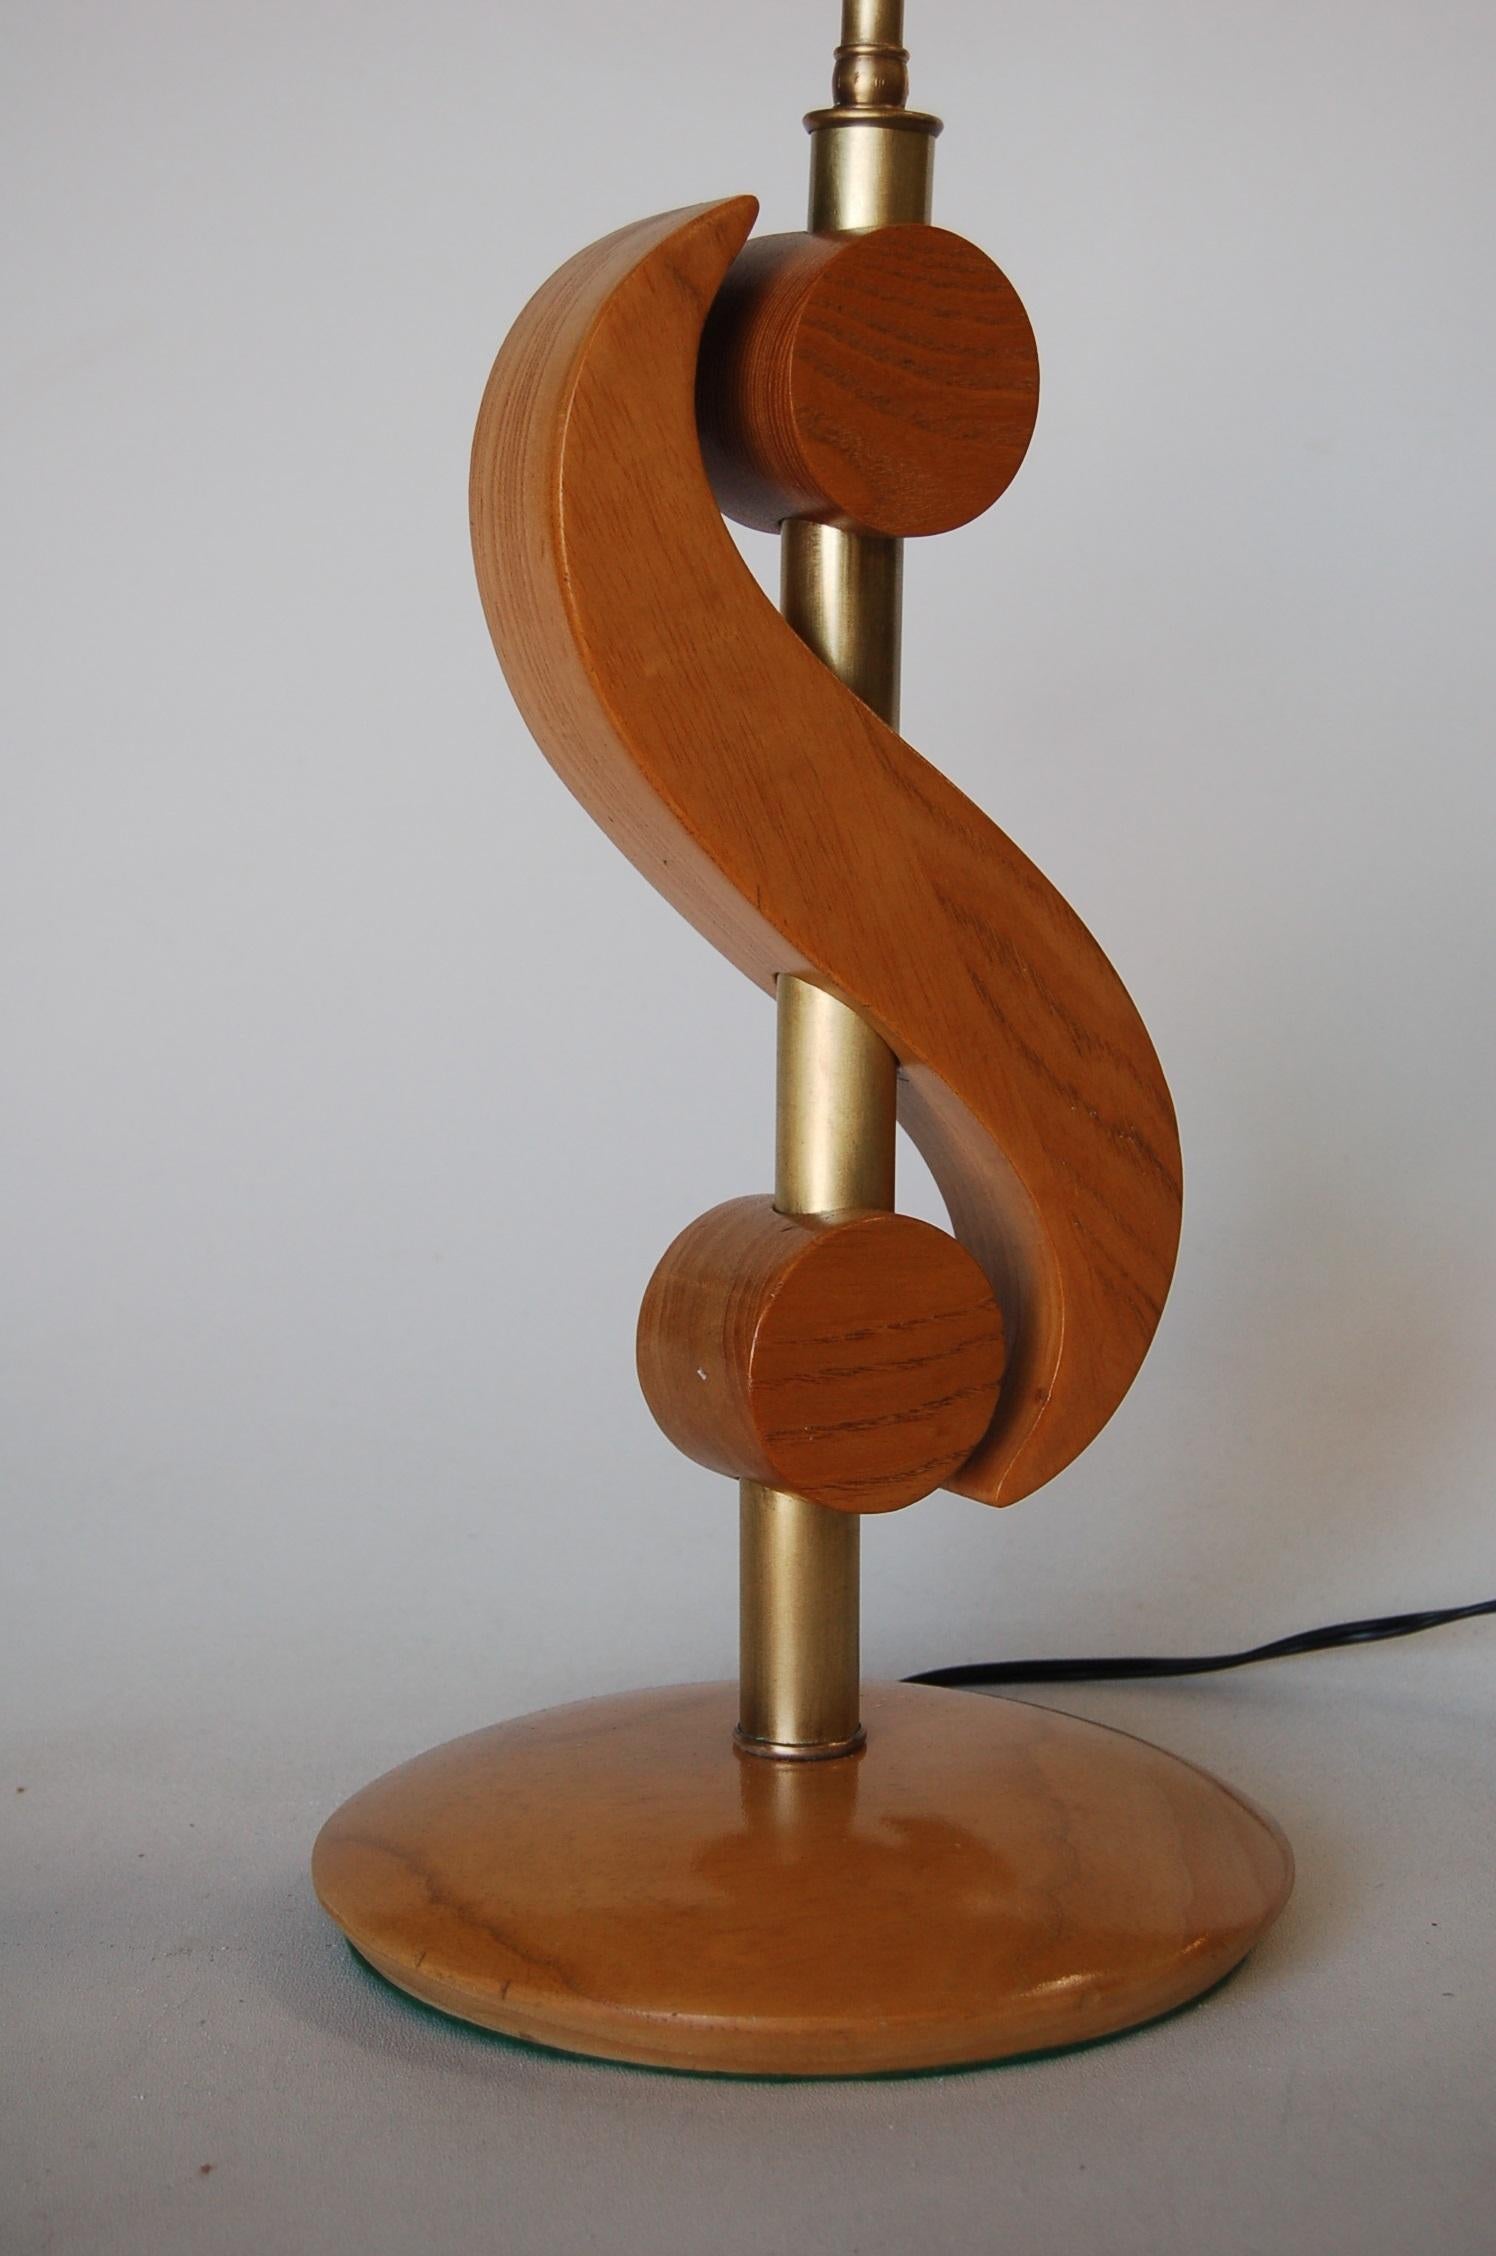 Carved Oak and Brass Biomorphic Modernist Table Lamp, Pair In Excellent Condition For Sale In Van Nuys, CA